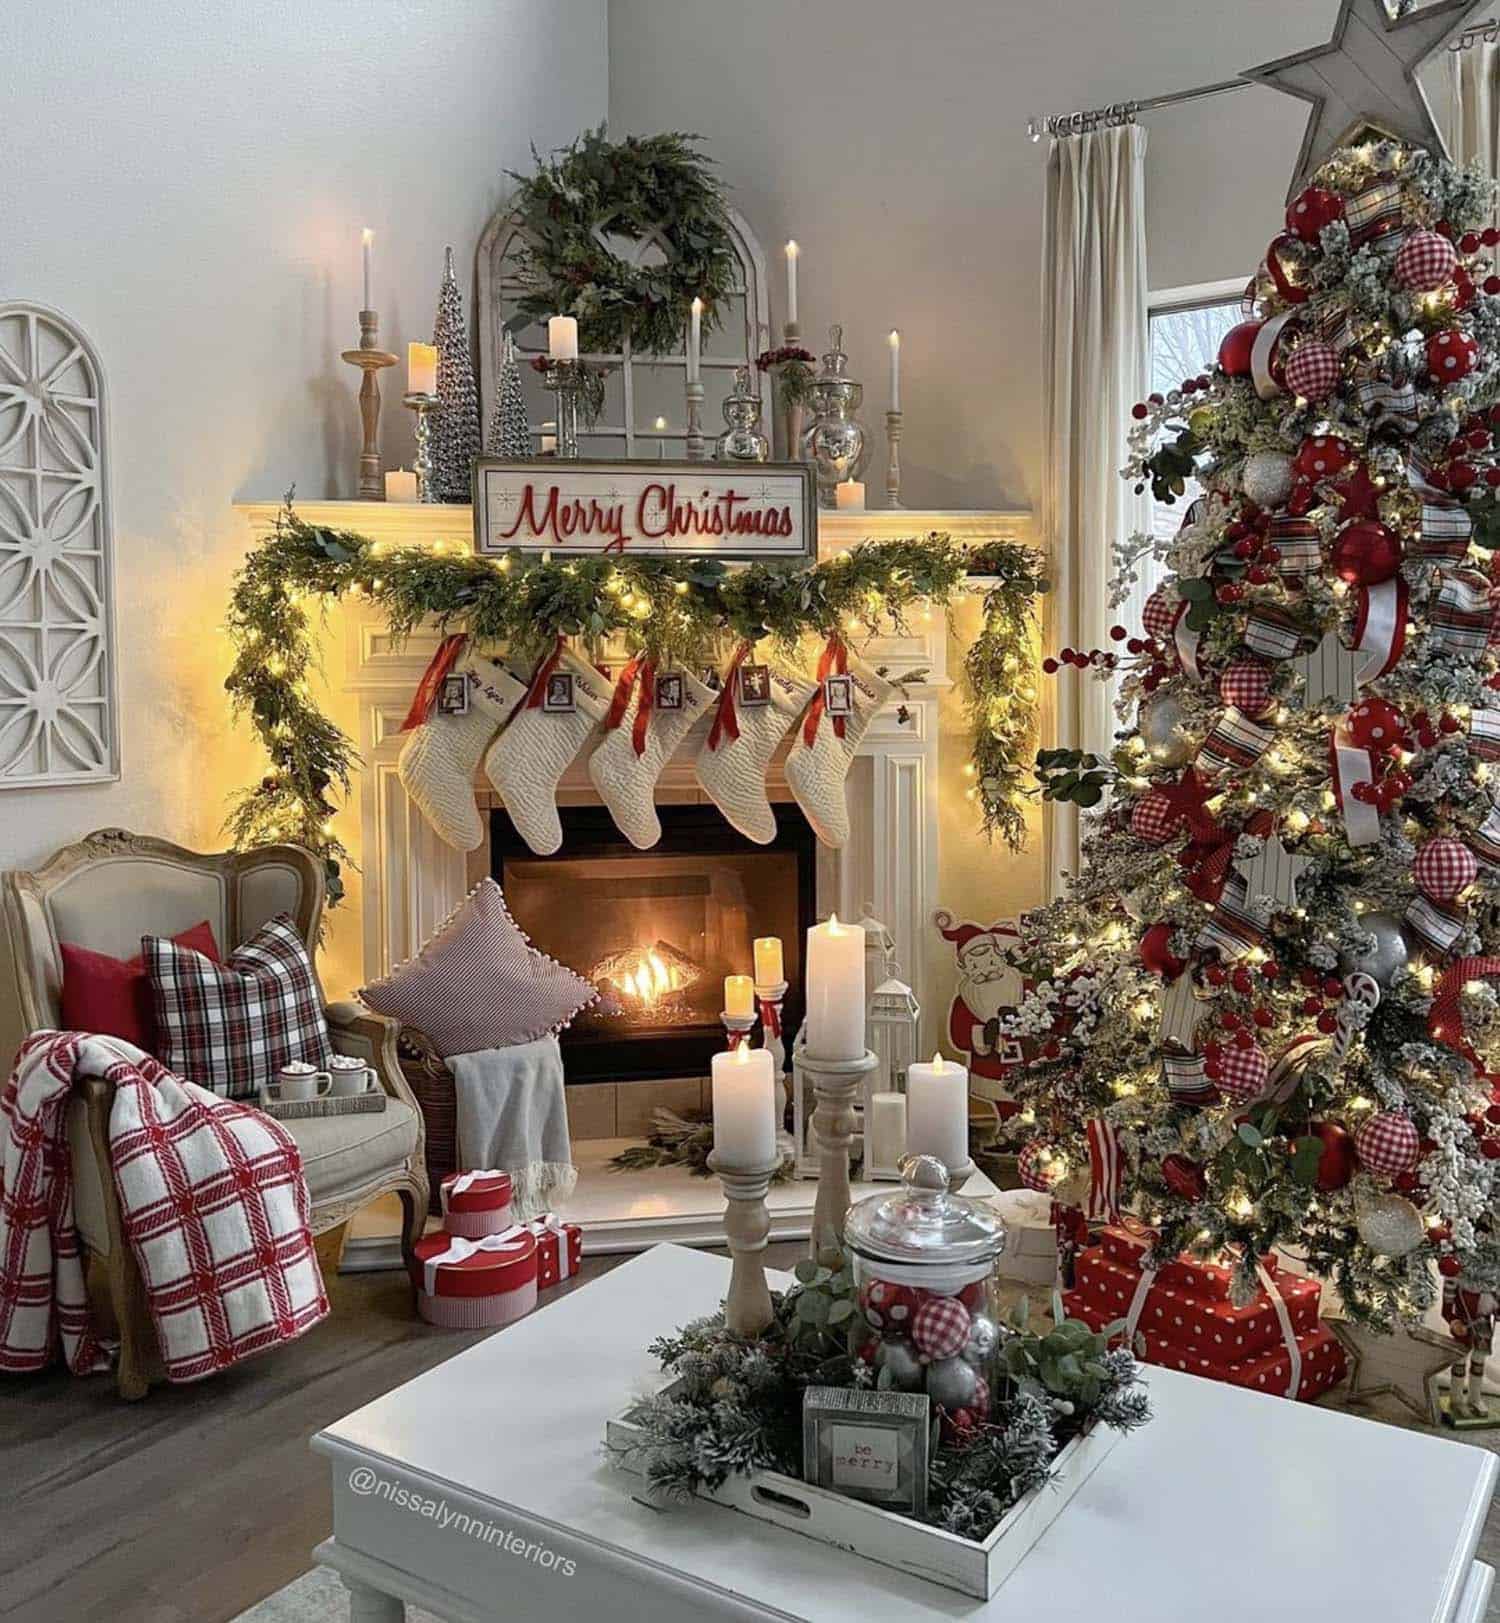 Christmas living room with stocking hung on the fireplace, garland and a tree